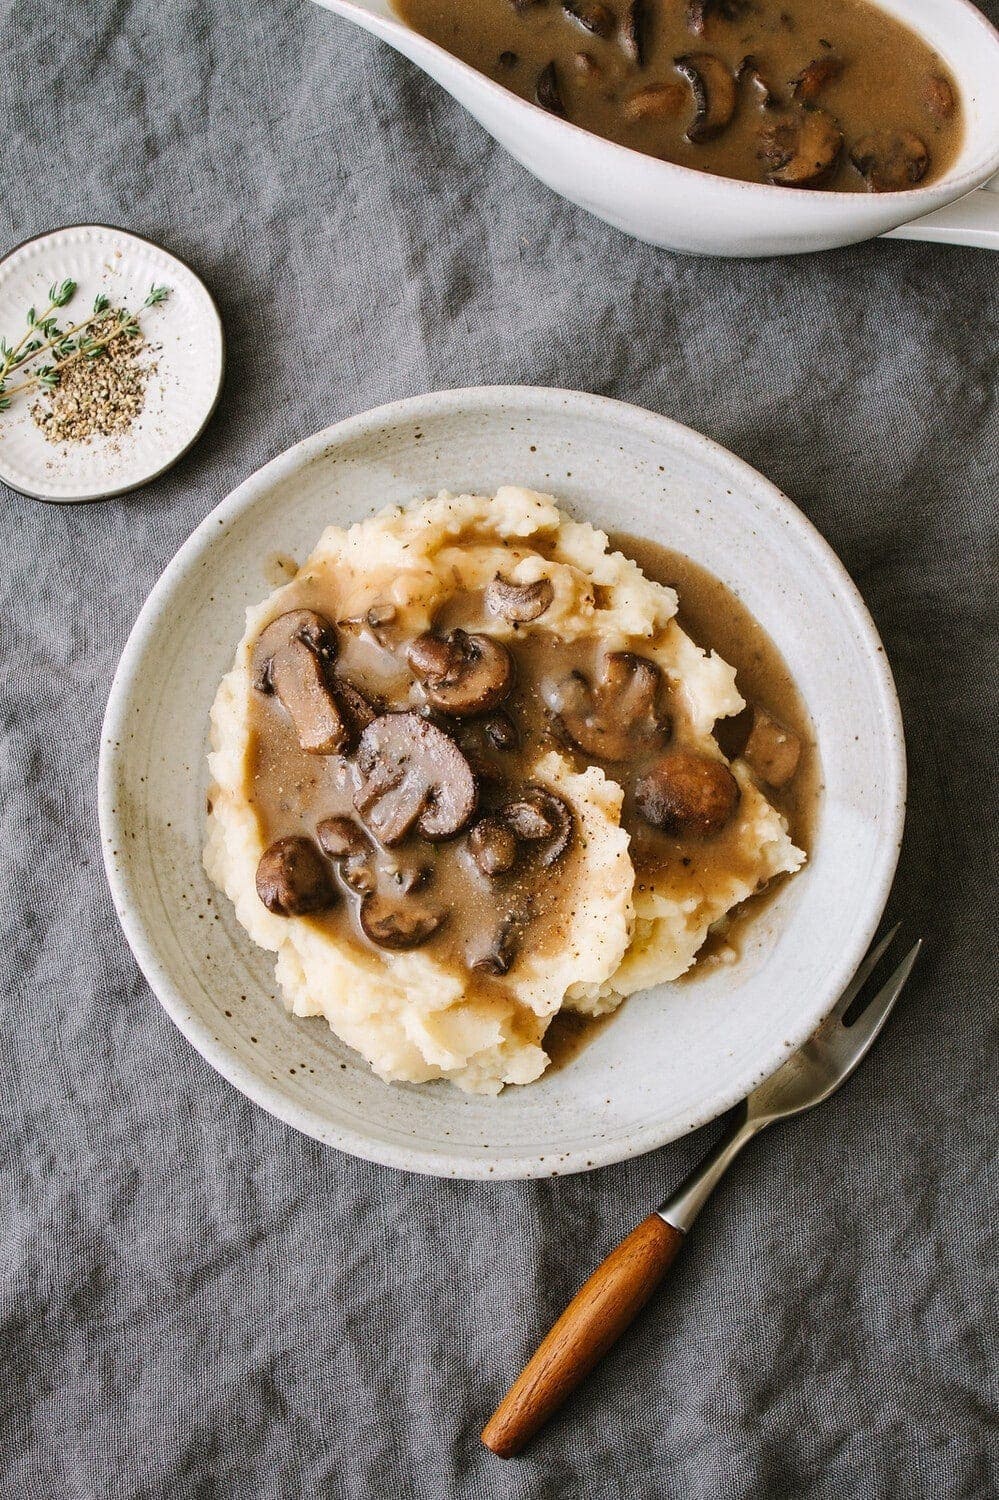 Mashed potato poured with mushroom gravy on top. 